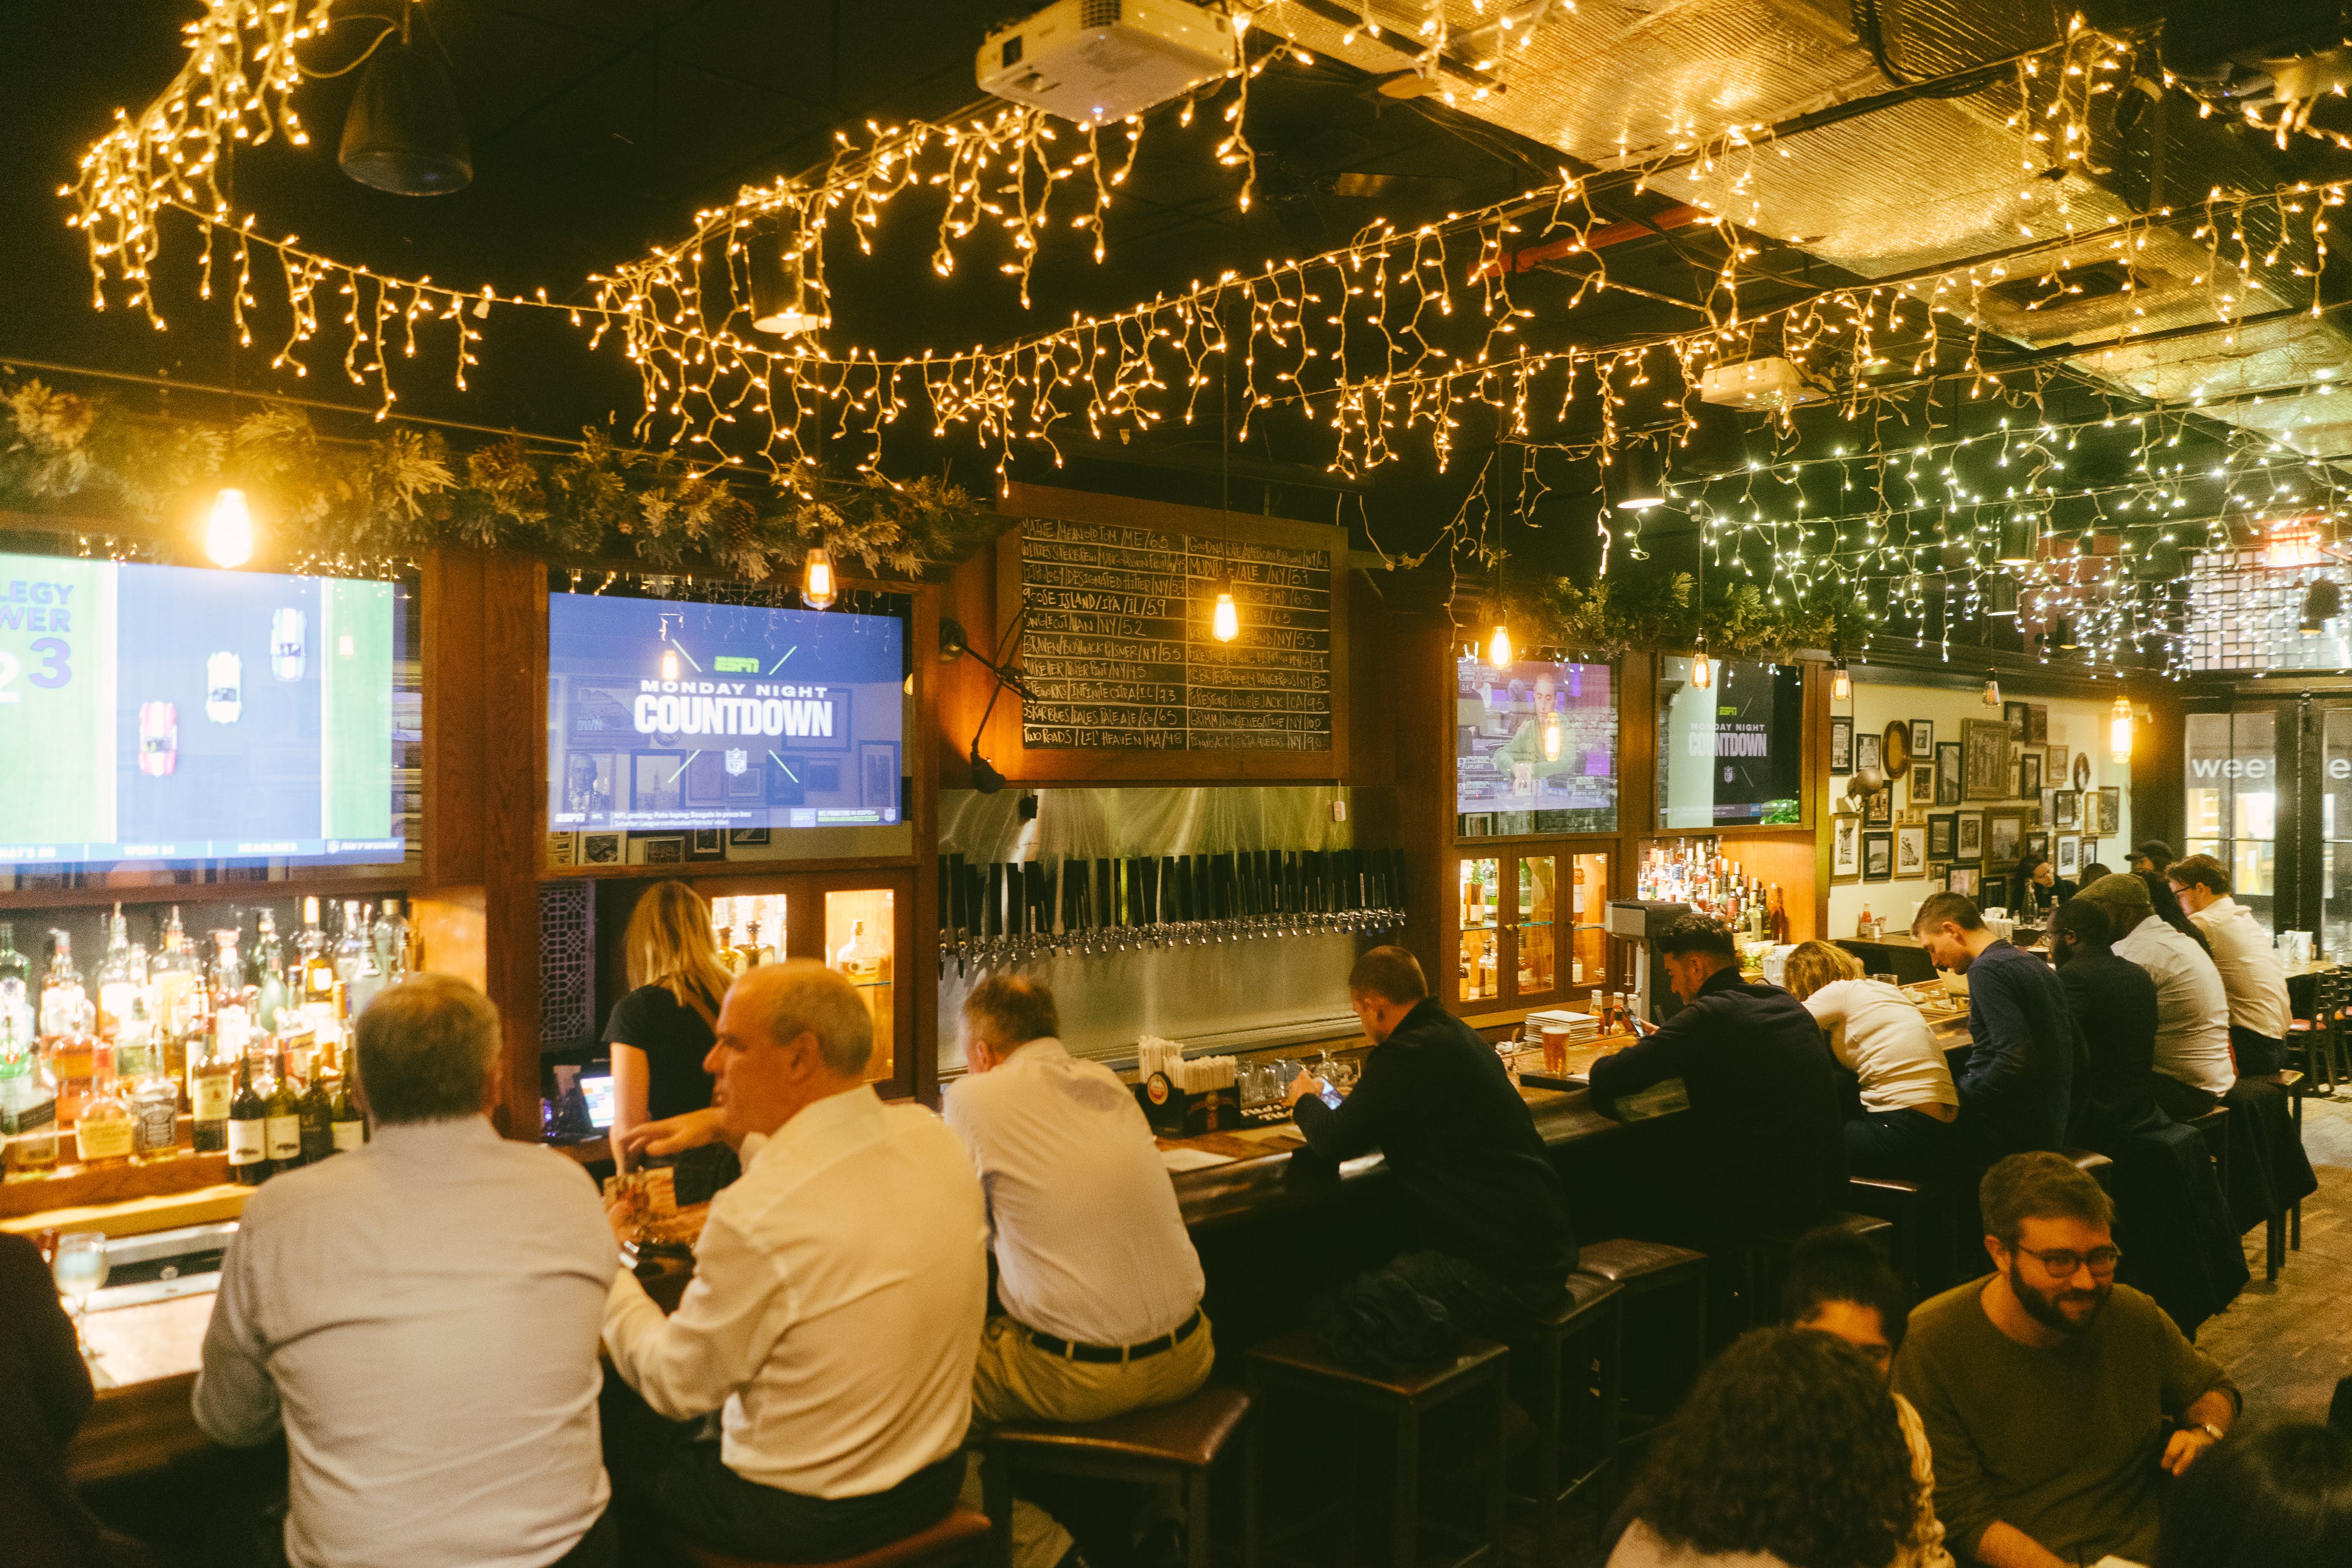 16 Best Soccer Bars In NYC To Watch A Game - Secret NYC